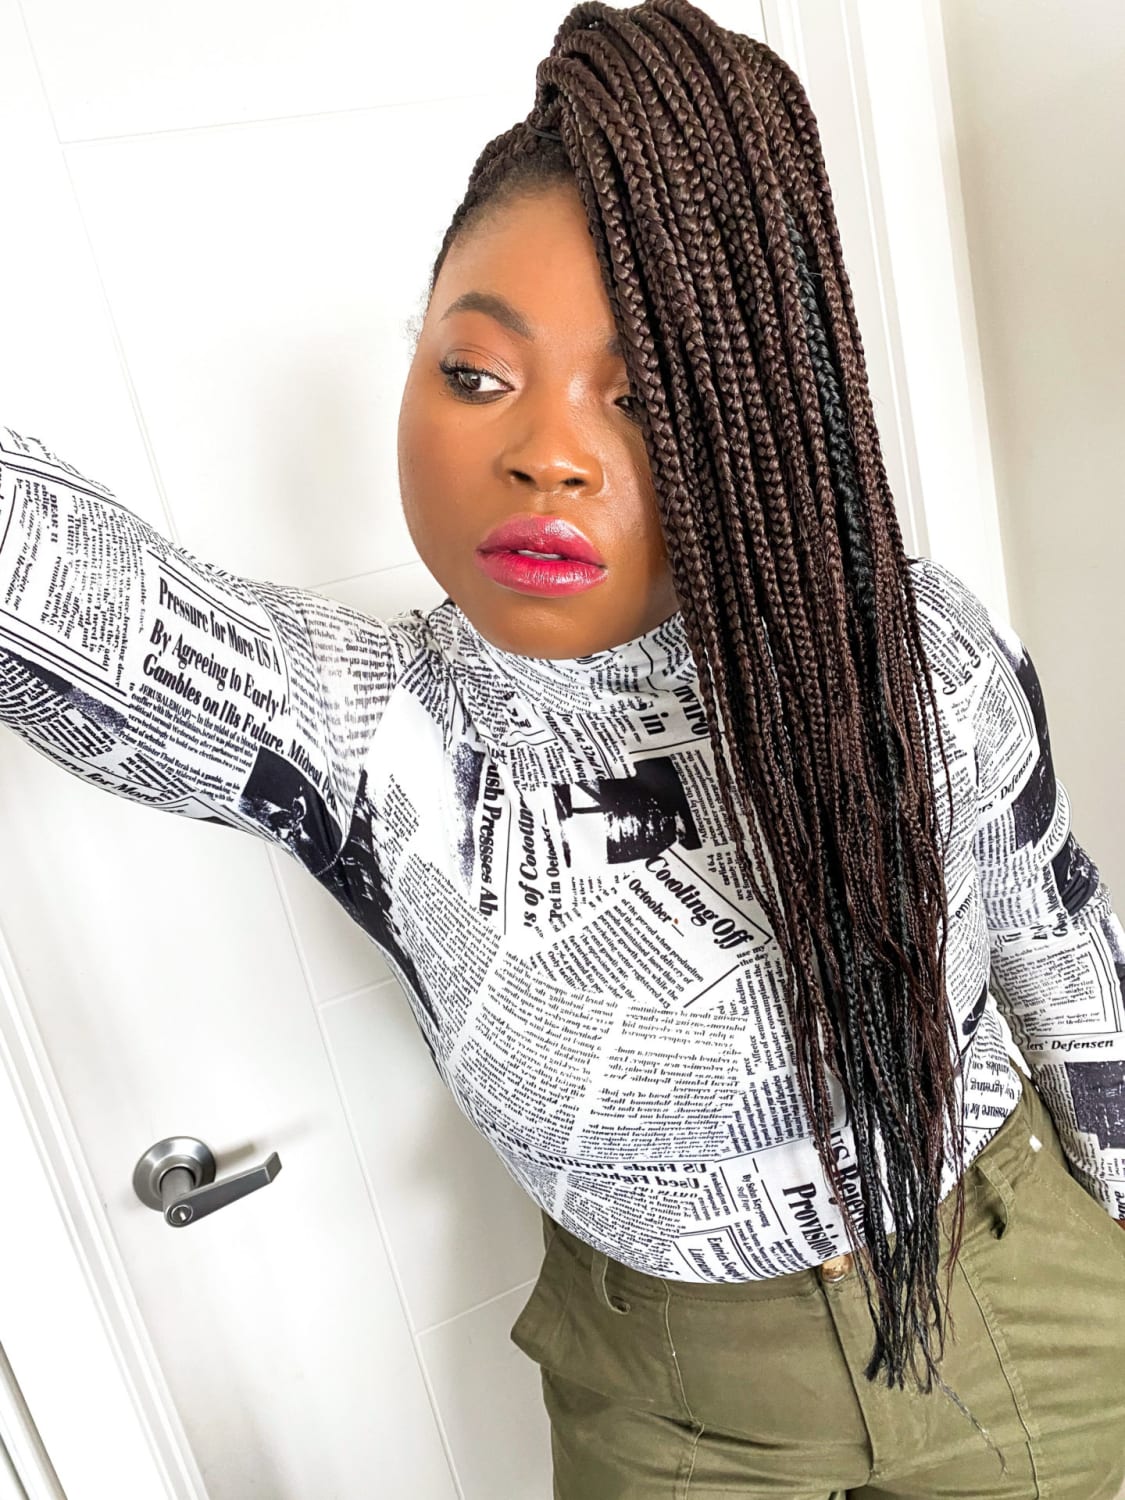 Simple KNOTLESS BOX BRAIDS STYLE - What you need to know